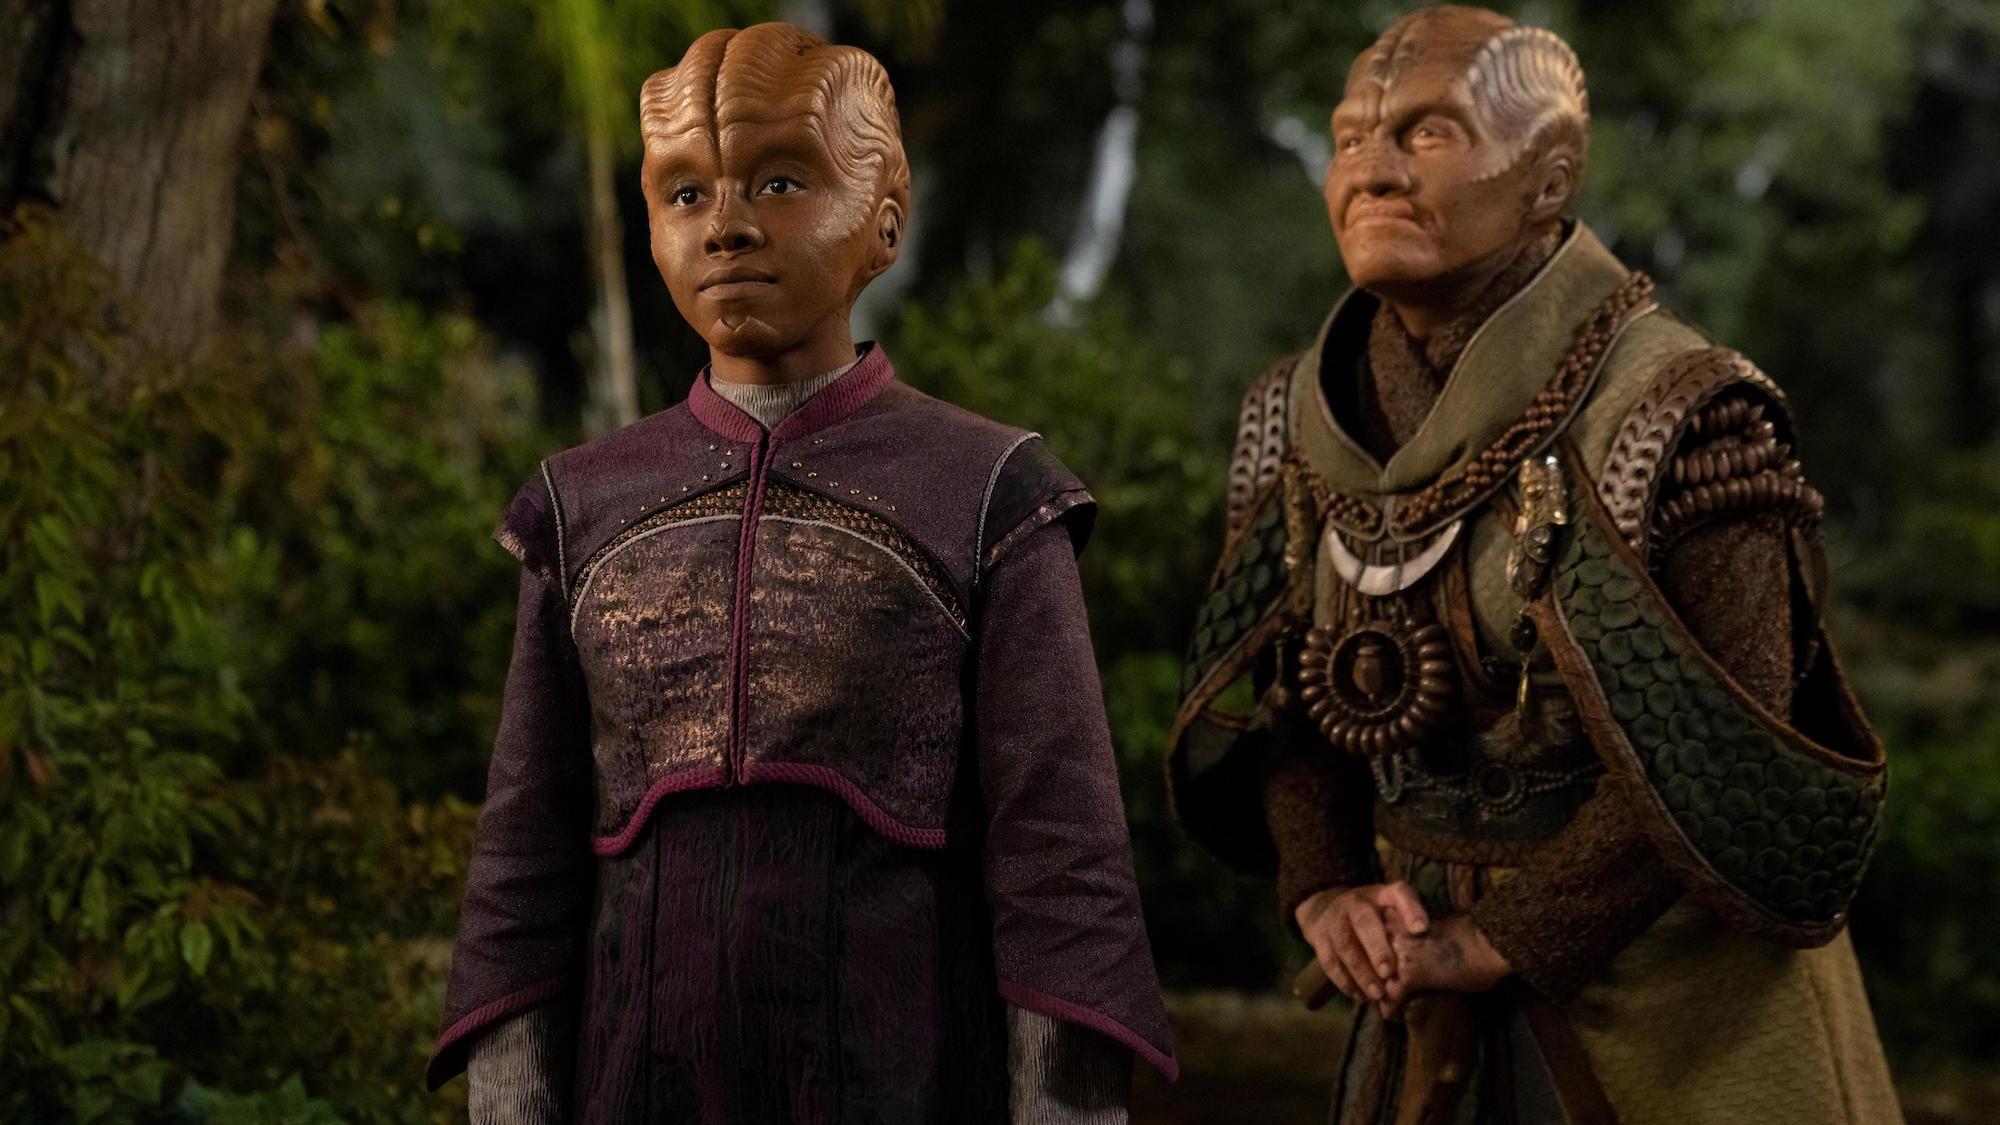 The Orville: New Horizons -- “Midnight Blue” - Episode 308 -- Kelly and Bortus are assigned to a mission that takes them to Heveena’s sanctuary world. Topa (Imani Pullum) and Heveena (Rena Owen), shown. (Photo by: Greg Gayne/Hulu)